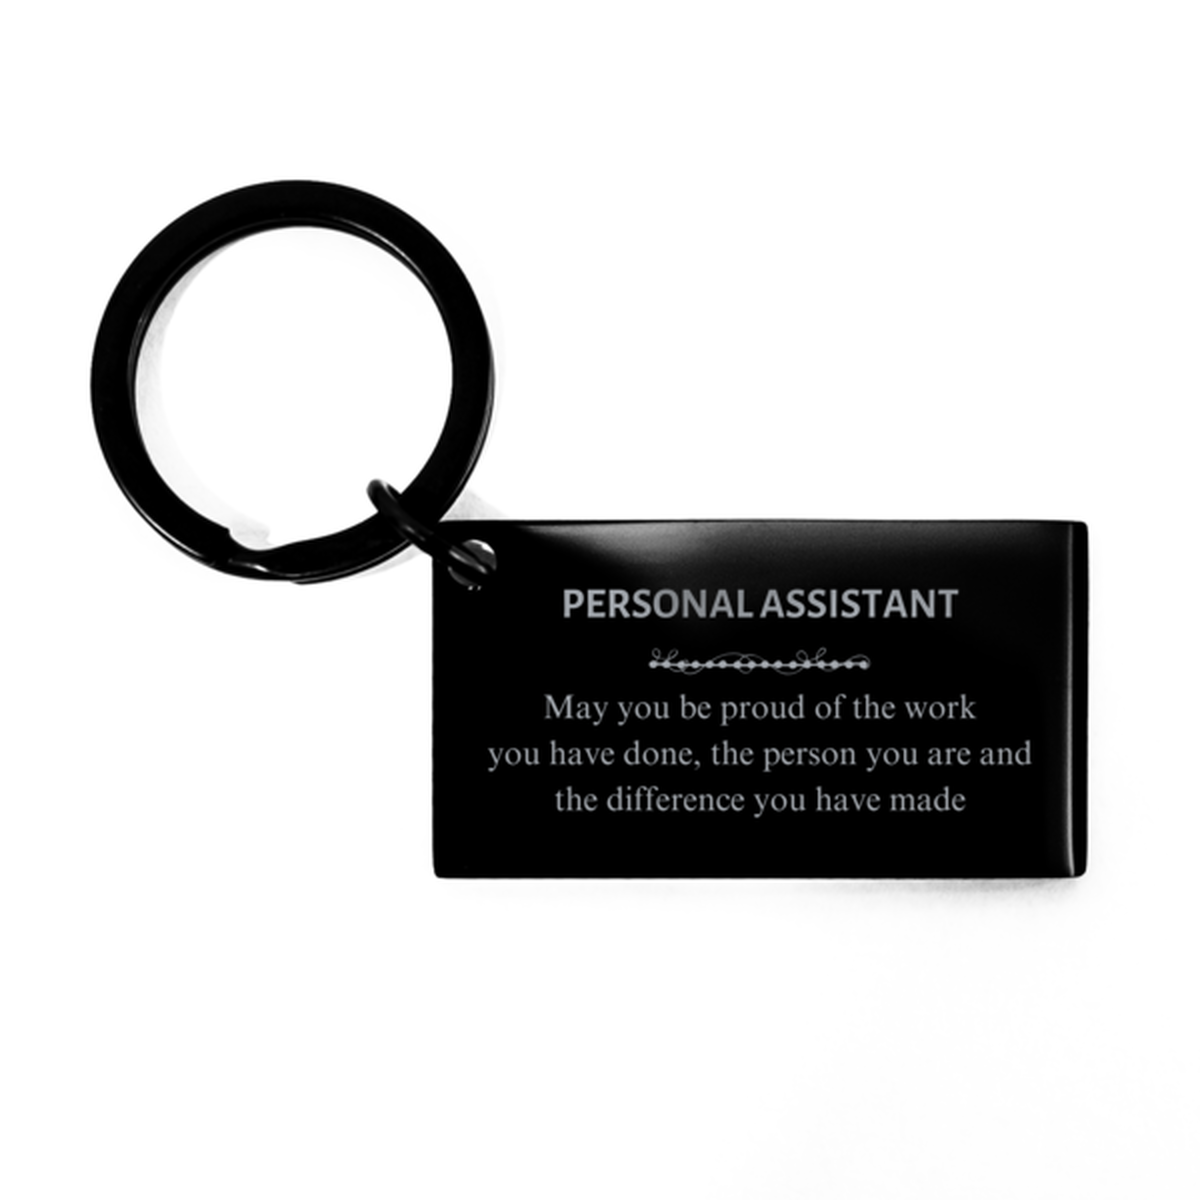 Receptionist May you be proud of the work you have done, Retirement Personal Assistant Keychain for Colleague Appreciation Gifts Amazing for Personal Assistant